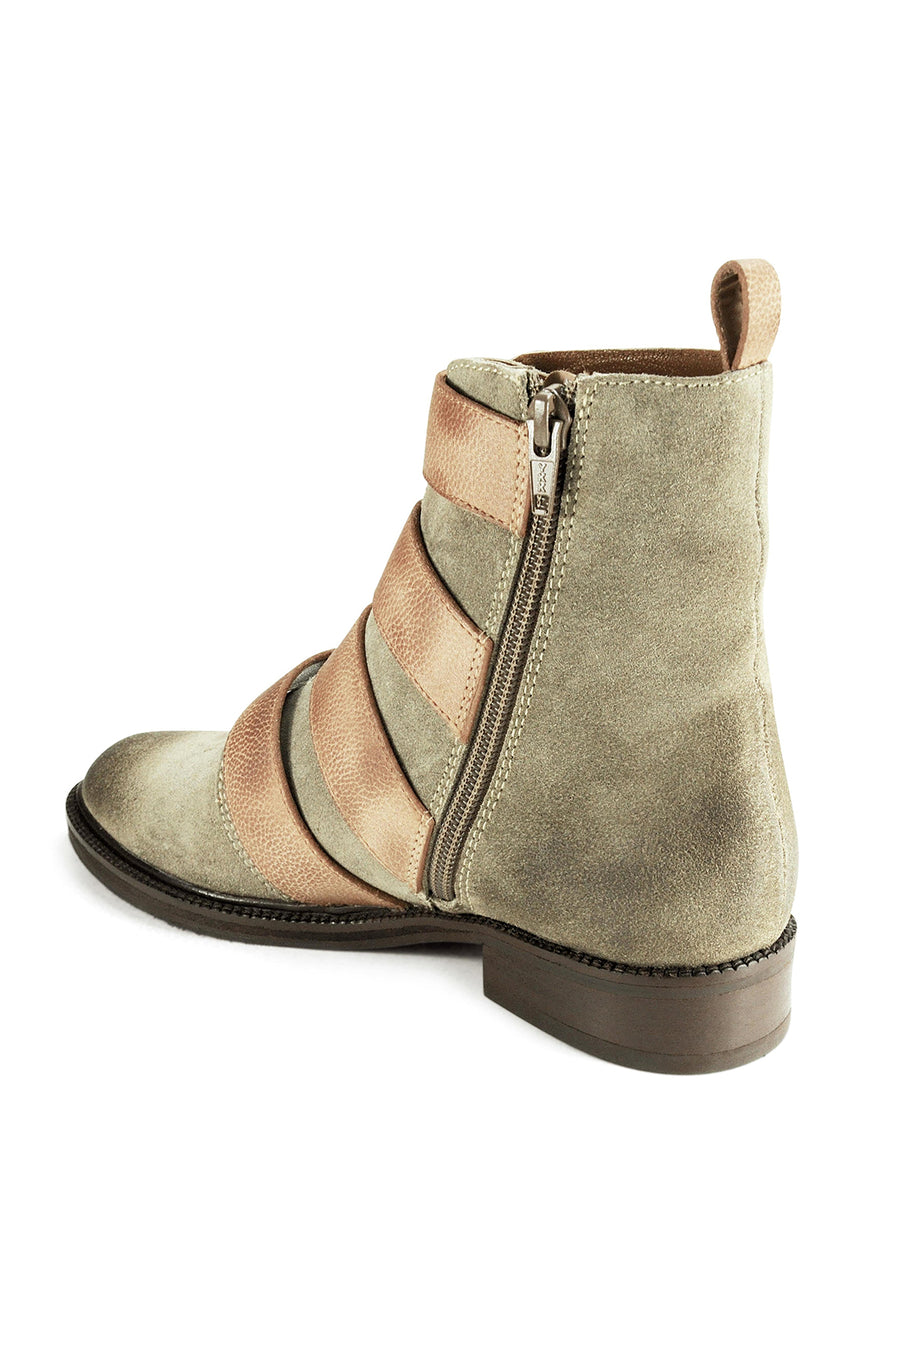 Hawthorne Taupe Suede Buckle Boot